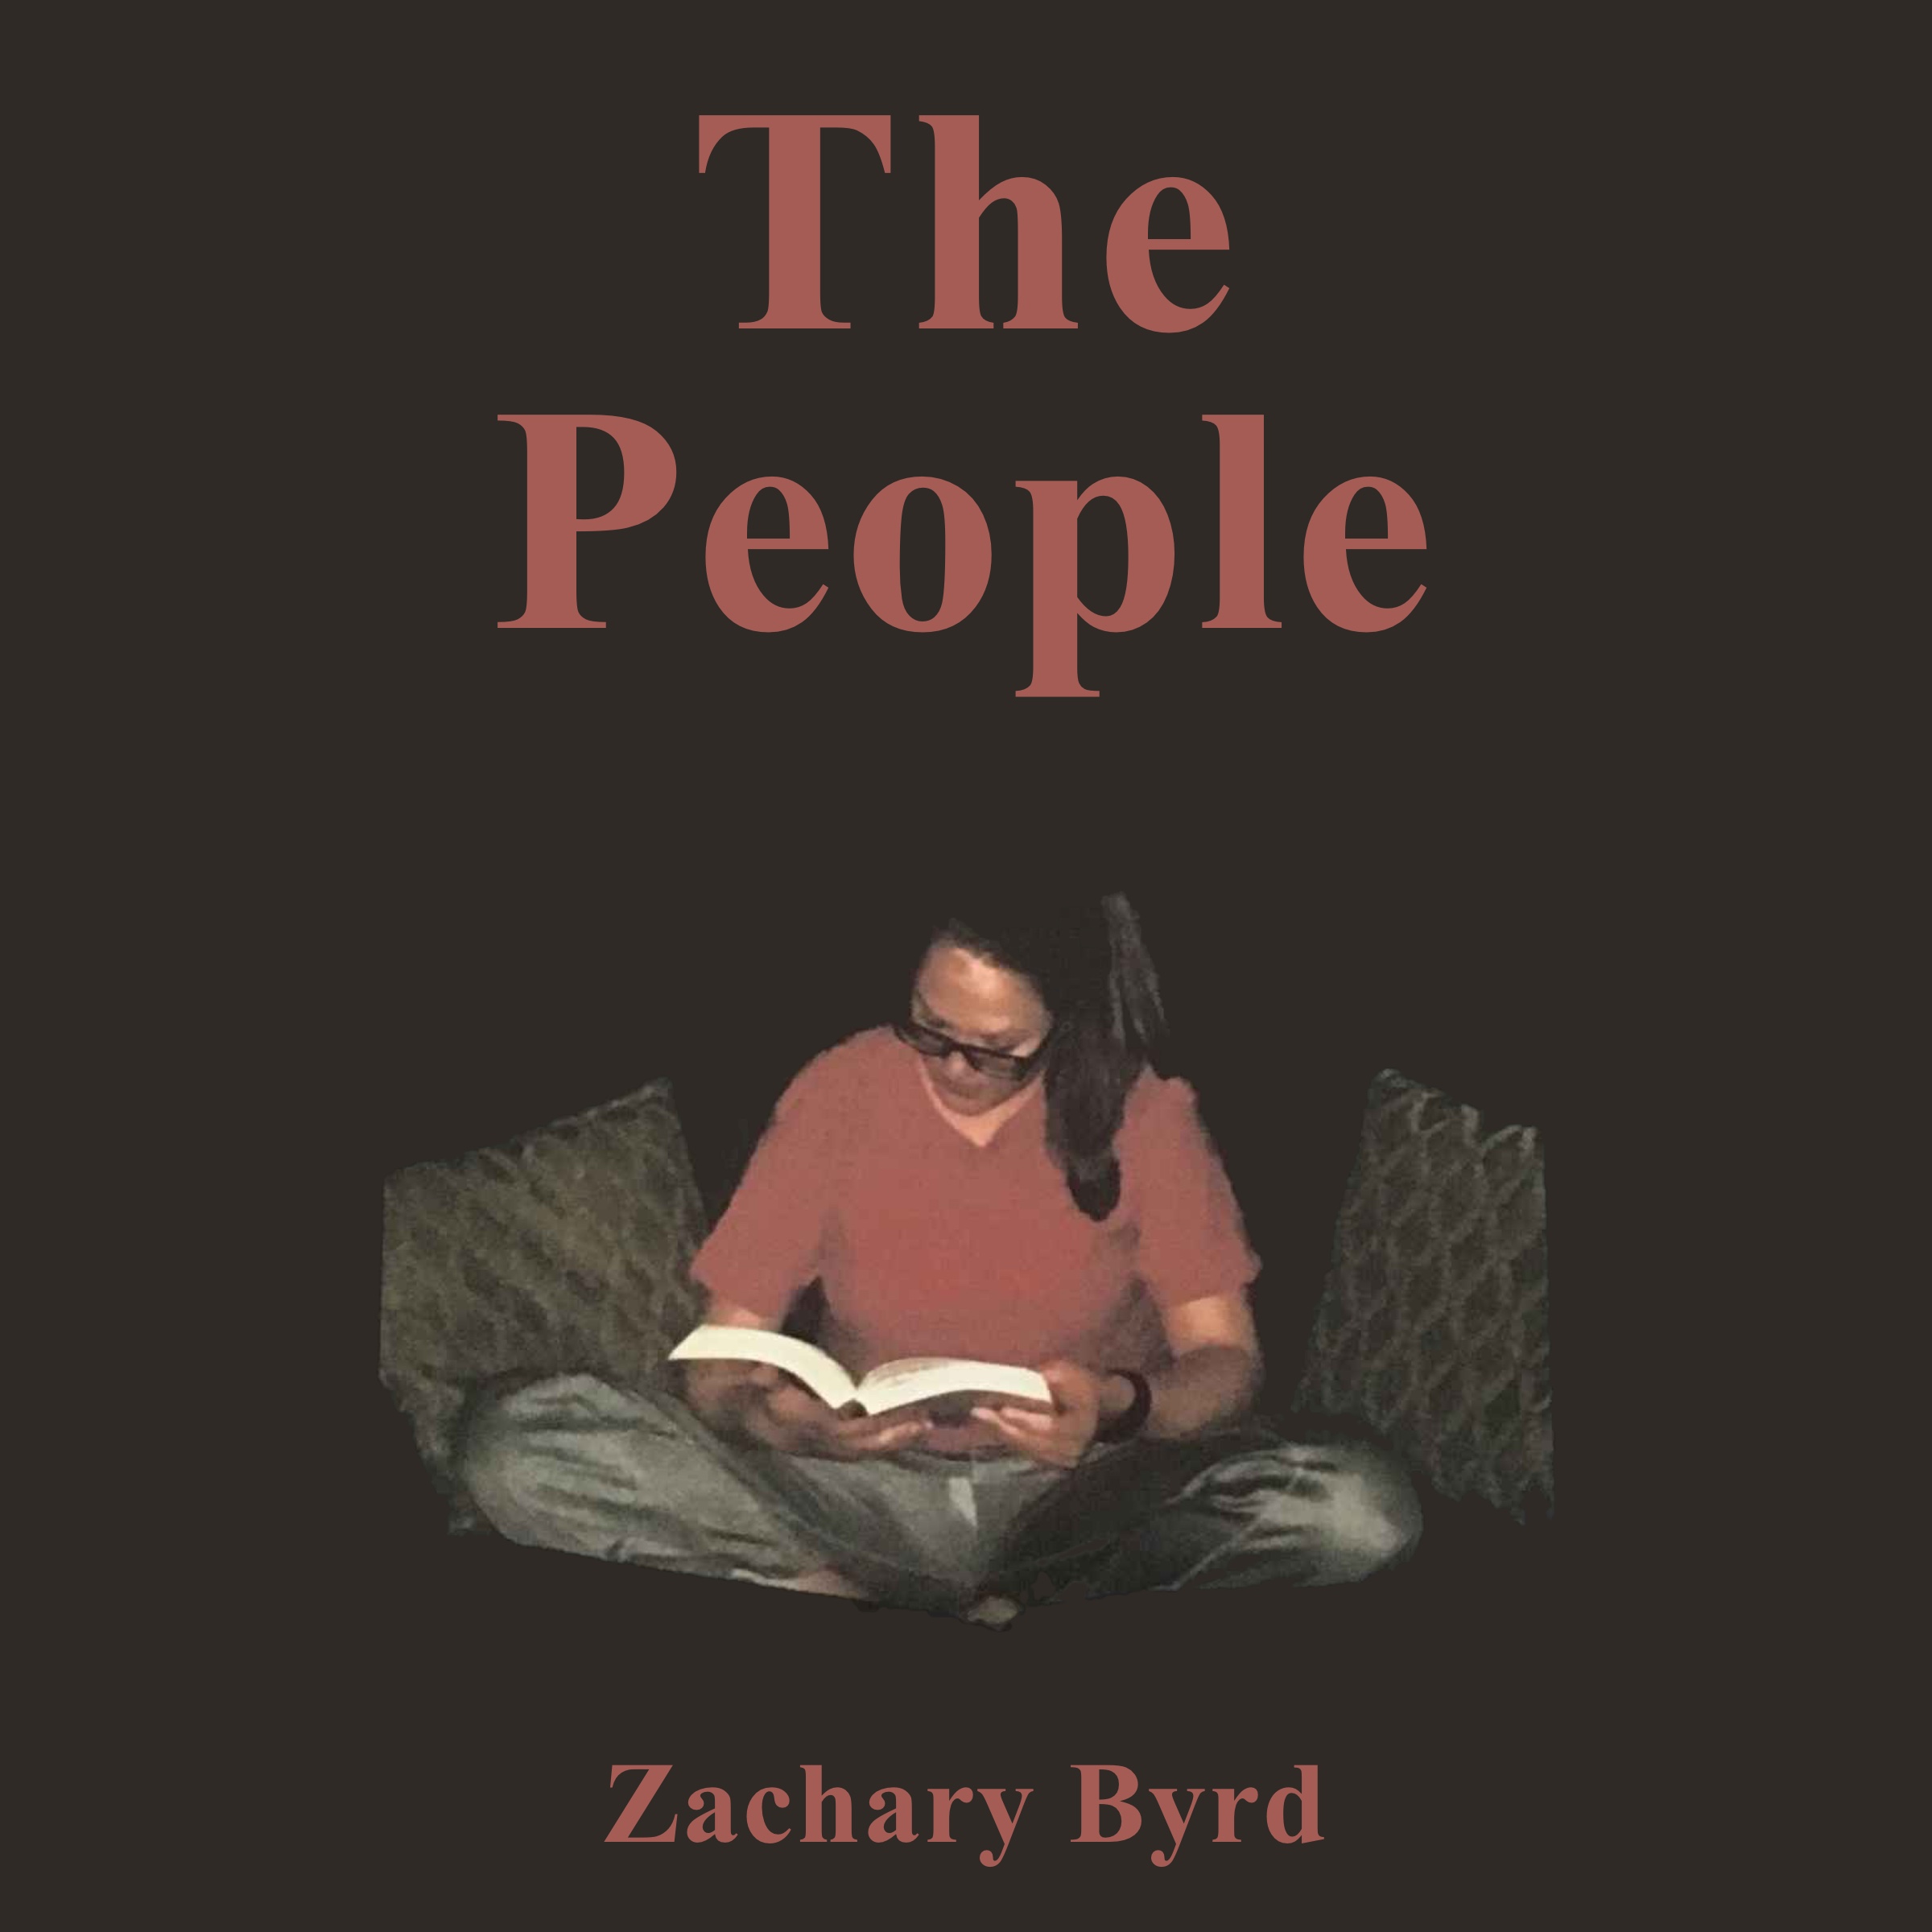 FREE: The People by Zachary Byrd